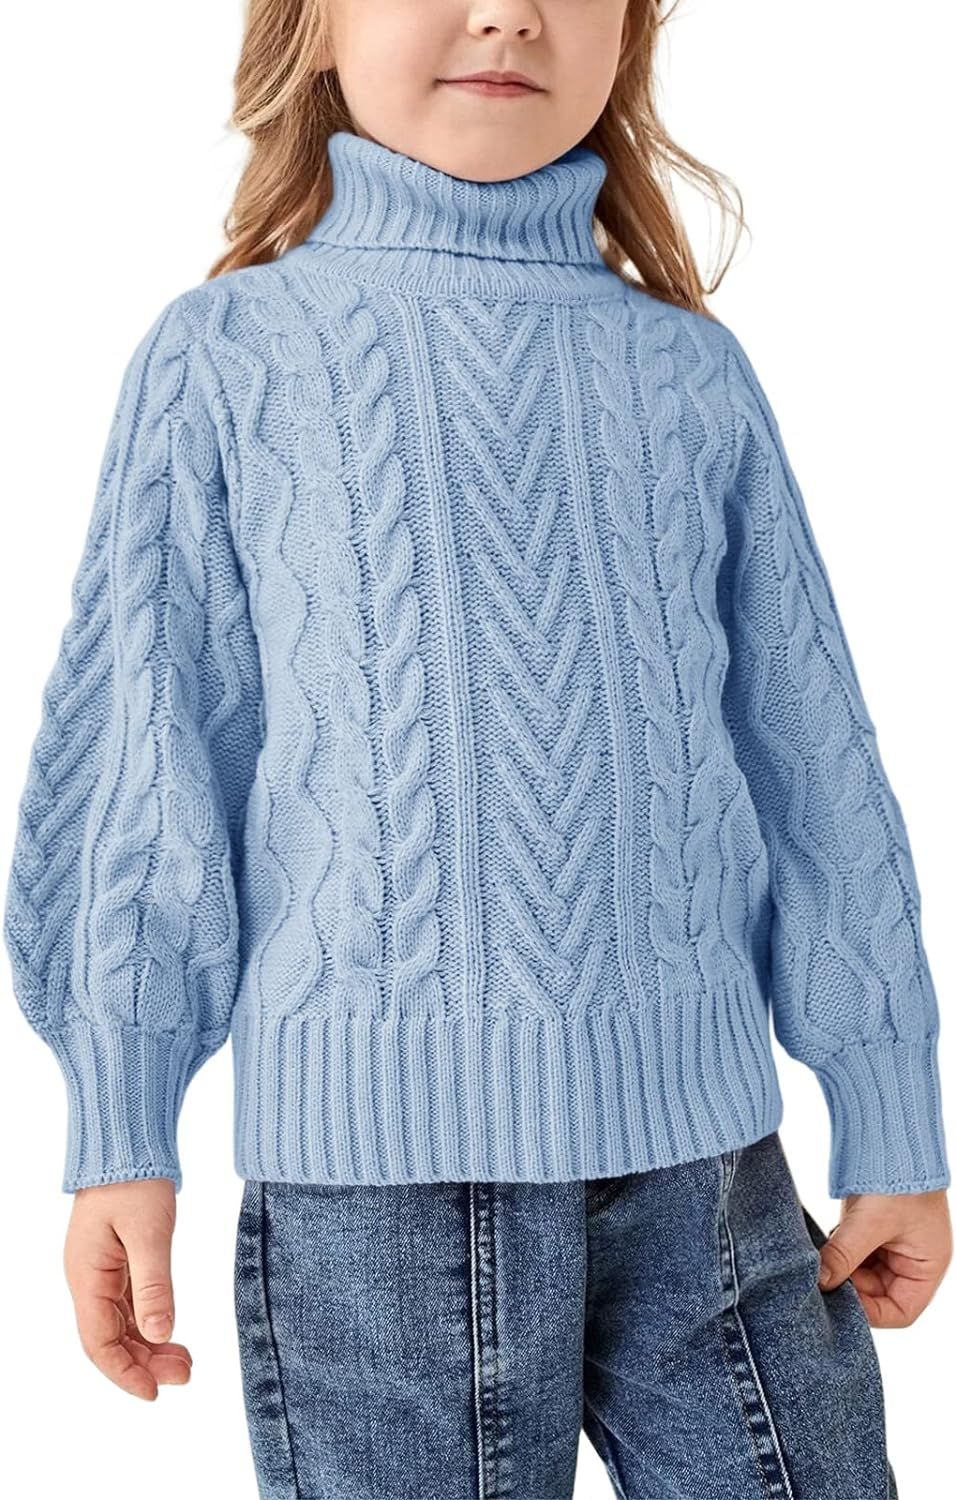 Girls Sweater Turtle Neck Puff Sleeve Chunky Cable Knit Kids Pullover Jumper Top | Amazon (US)